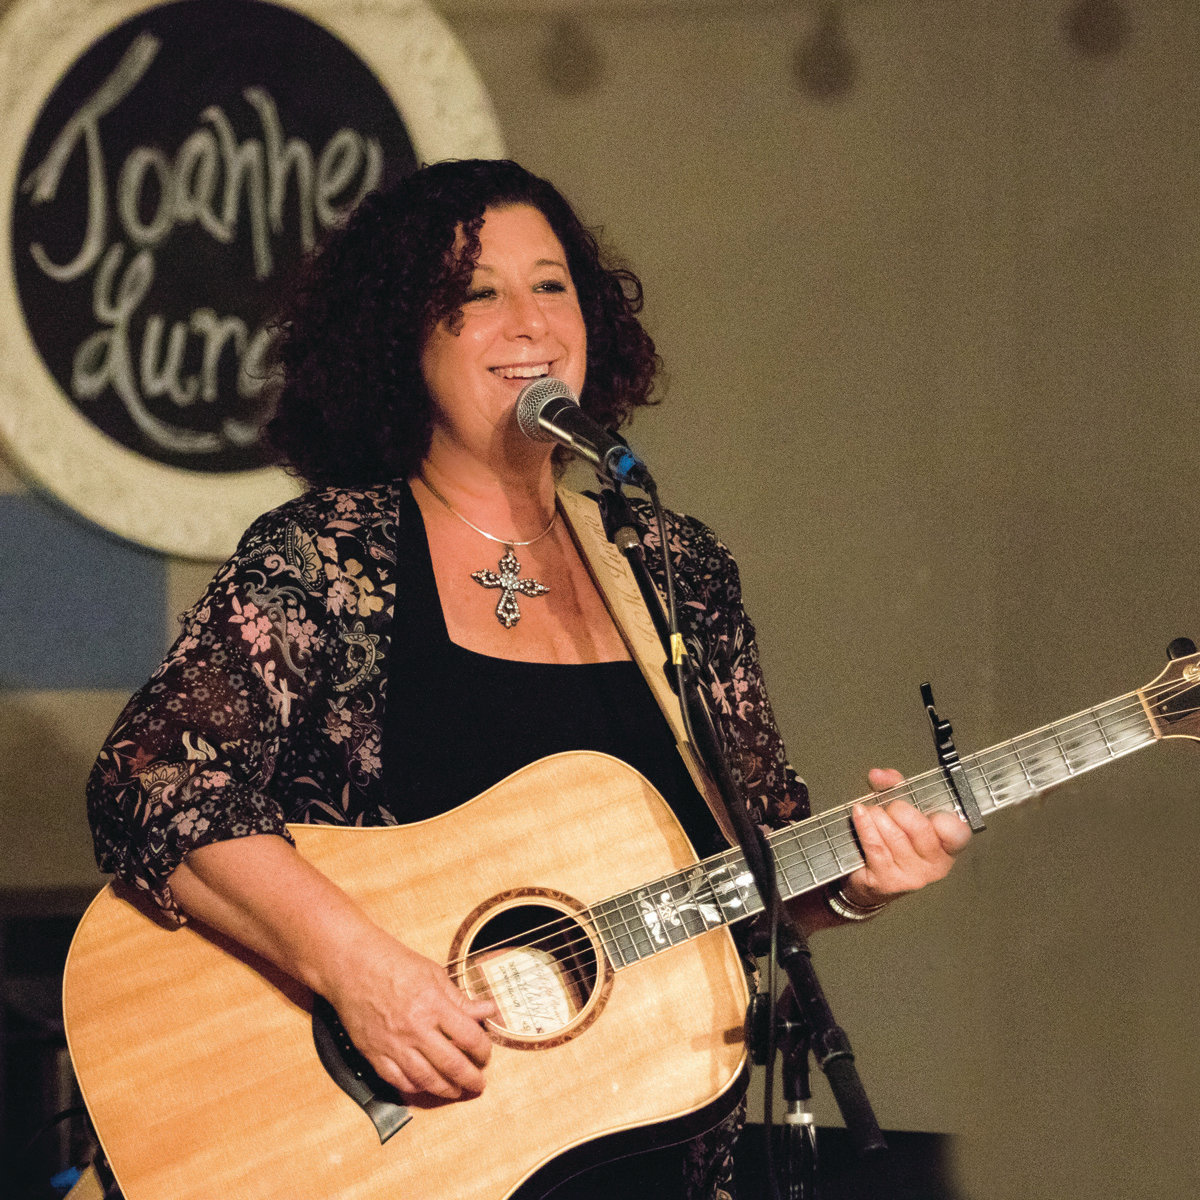 SHARING EMOTIONS: Warwick resident and musician Joanne Lurgio recently won the John Lennon Songwriting Contest’s “Stuck at Home” weekly songwriting contest with her song “Seven Minutes Down,” recounting the final moments of George Floyd.